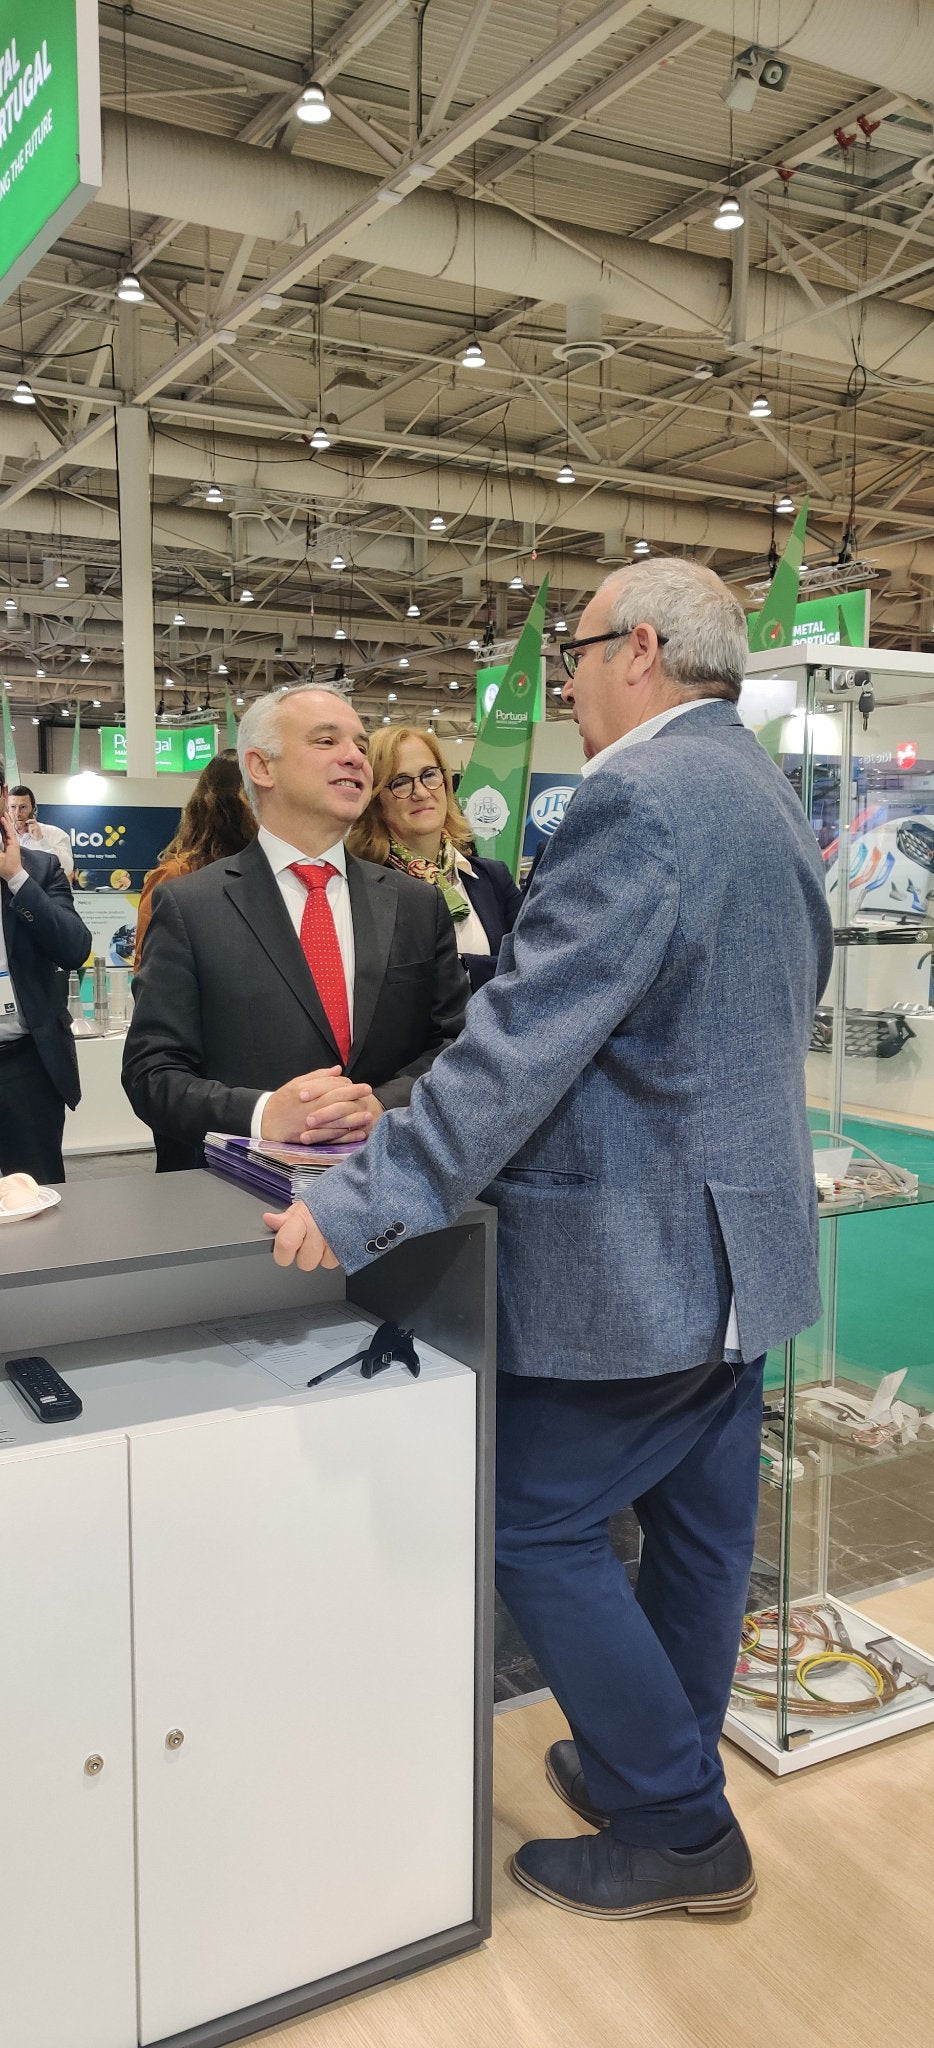 Mr. Secretary of State for Internationalization visits the Lusoservica stand